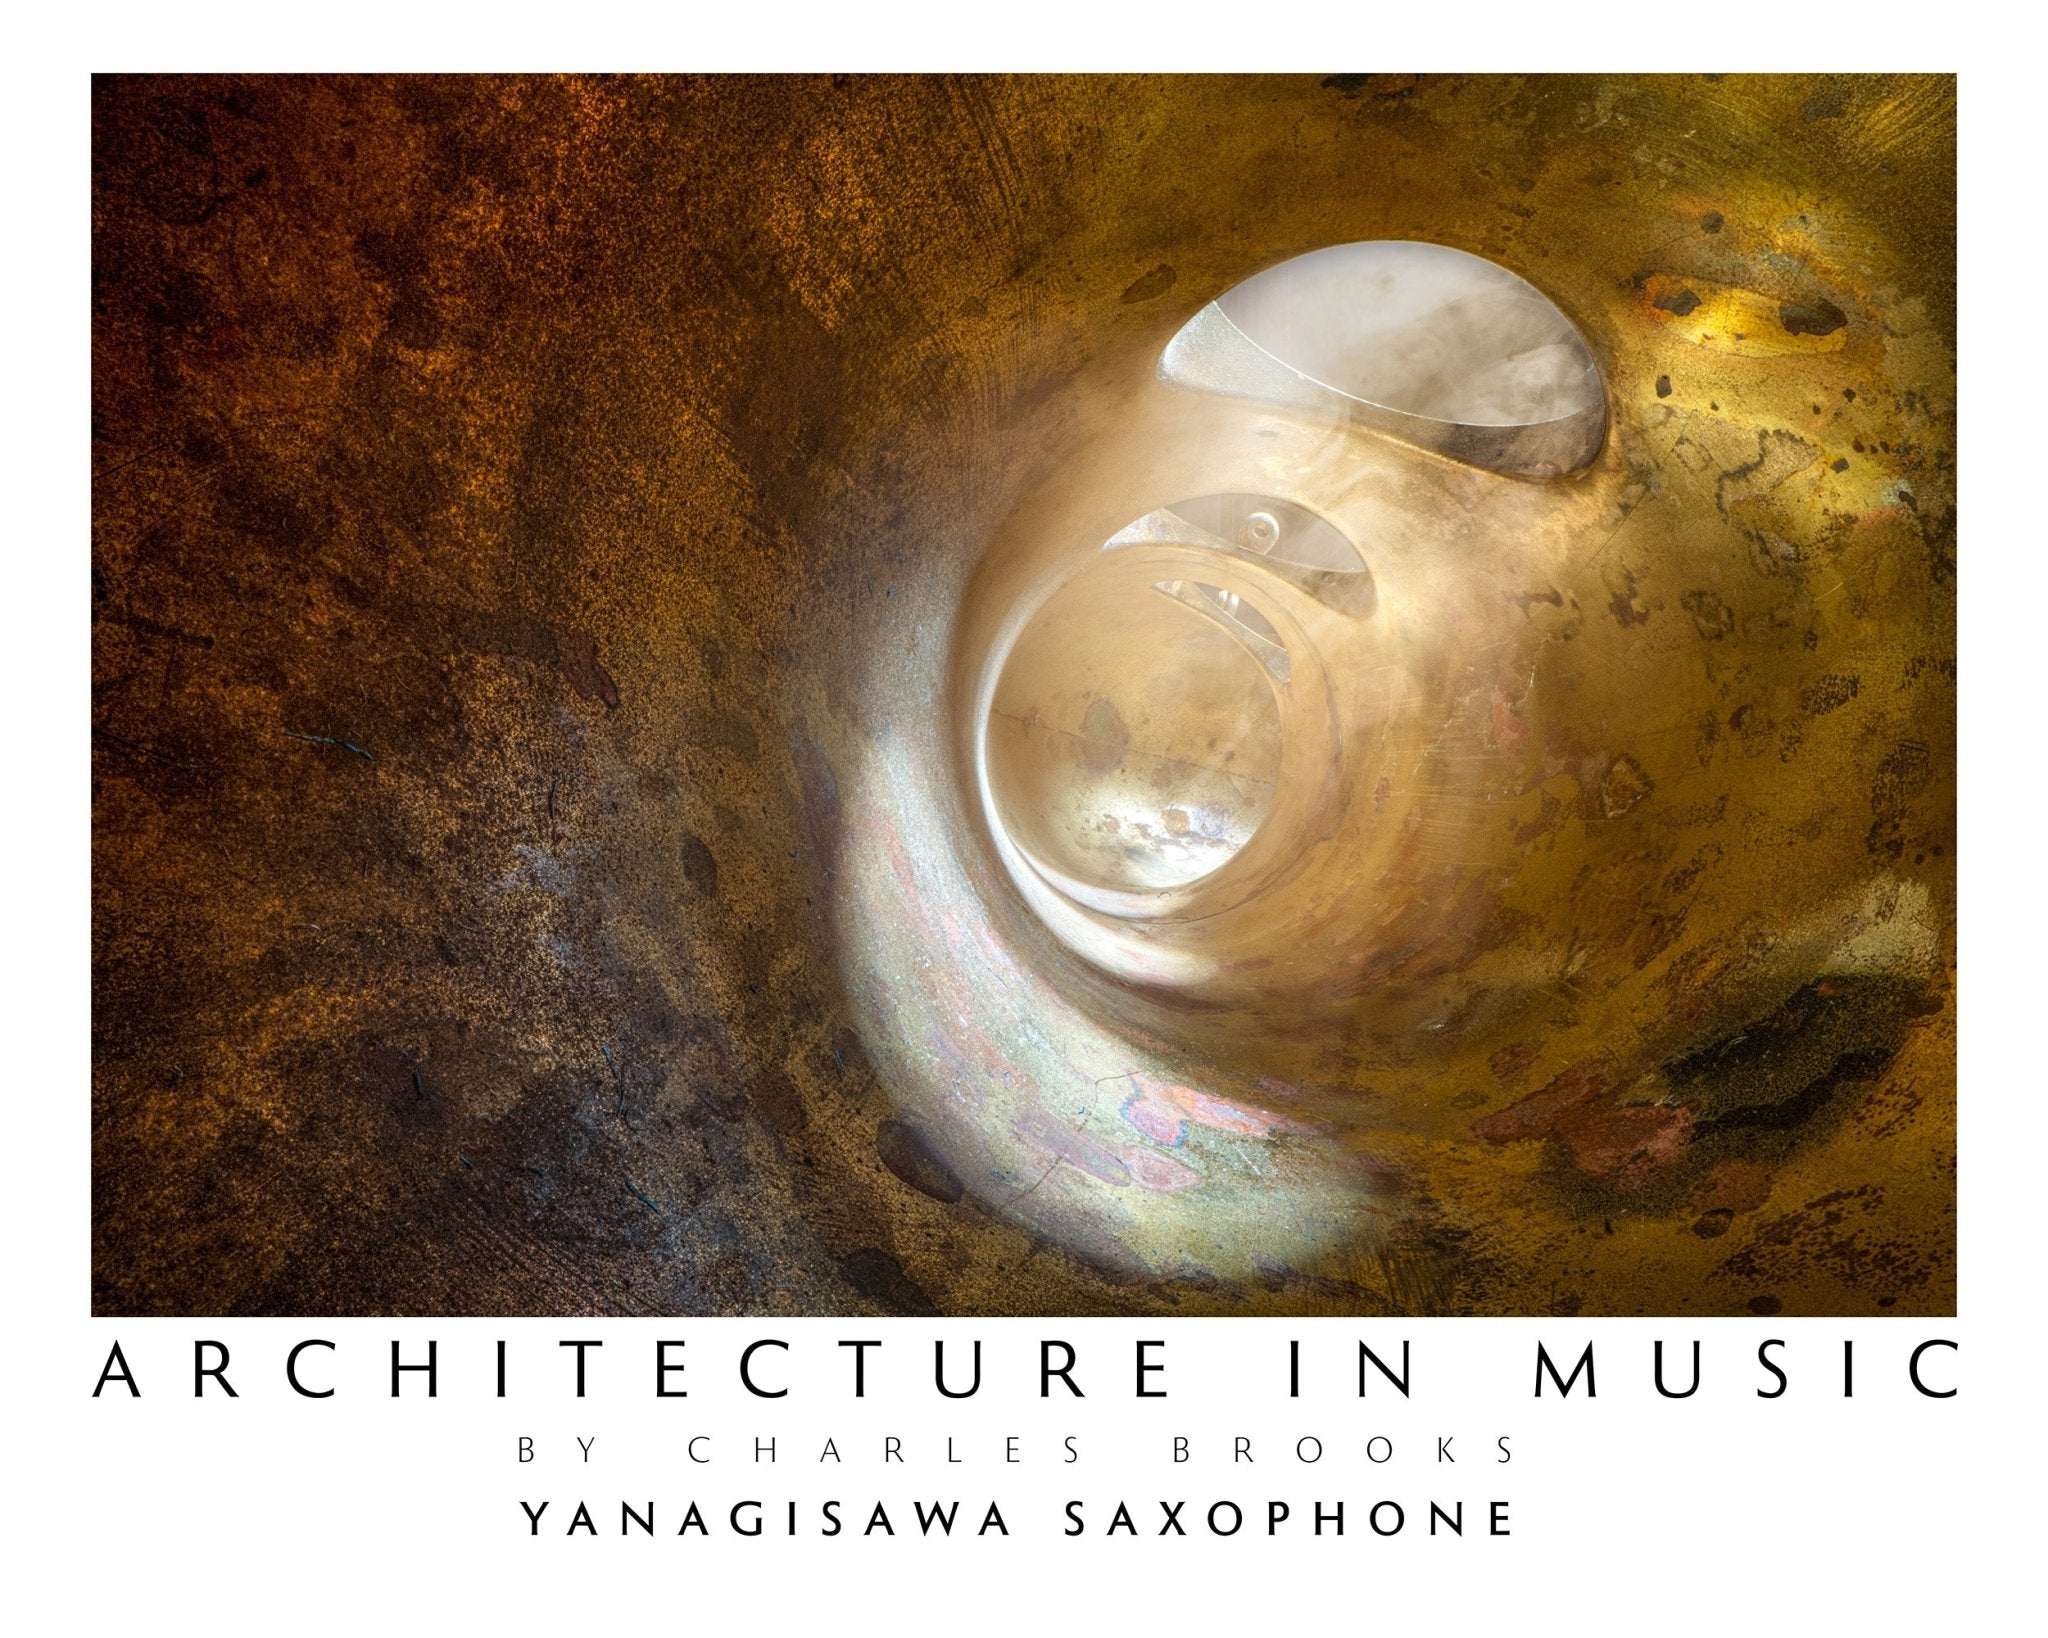 Photo of Yanagisawa 1980s Saxophone, Part 2. High Quality Poster. - Giclée Poster Print - Architecture In Music